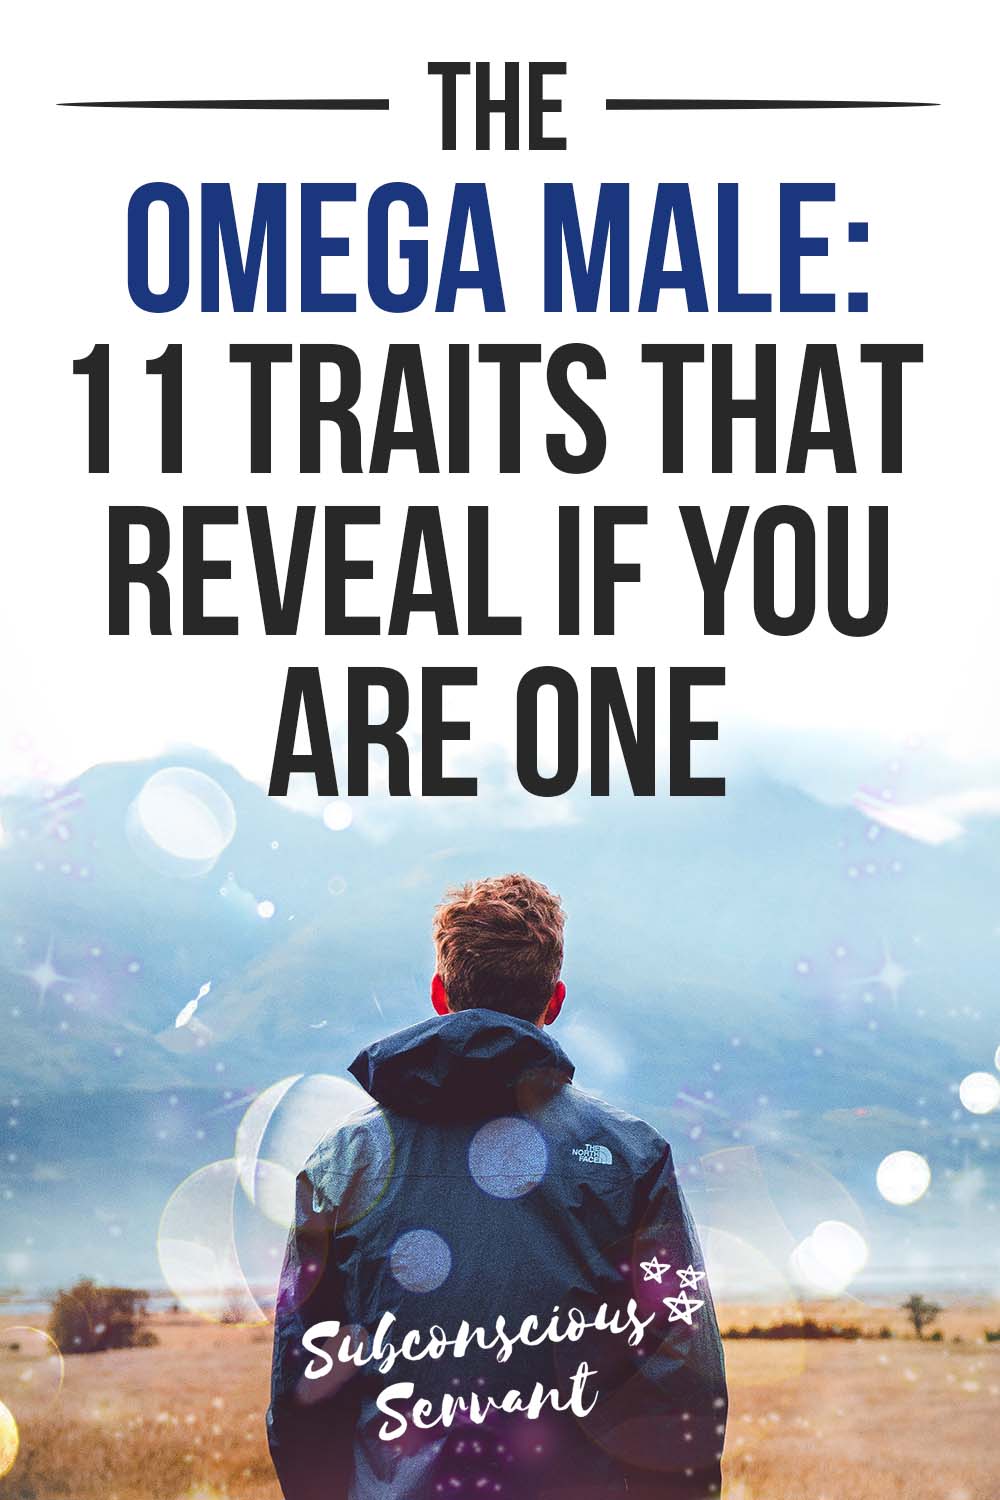 The Omega Male: 11 Interesting Traits That Reveal If YOU Are One